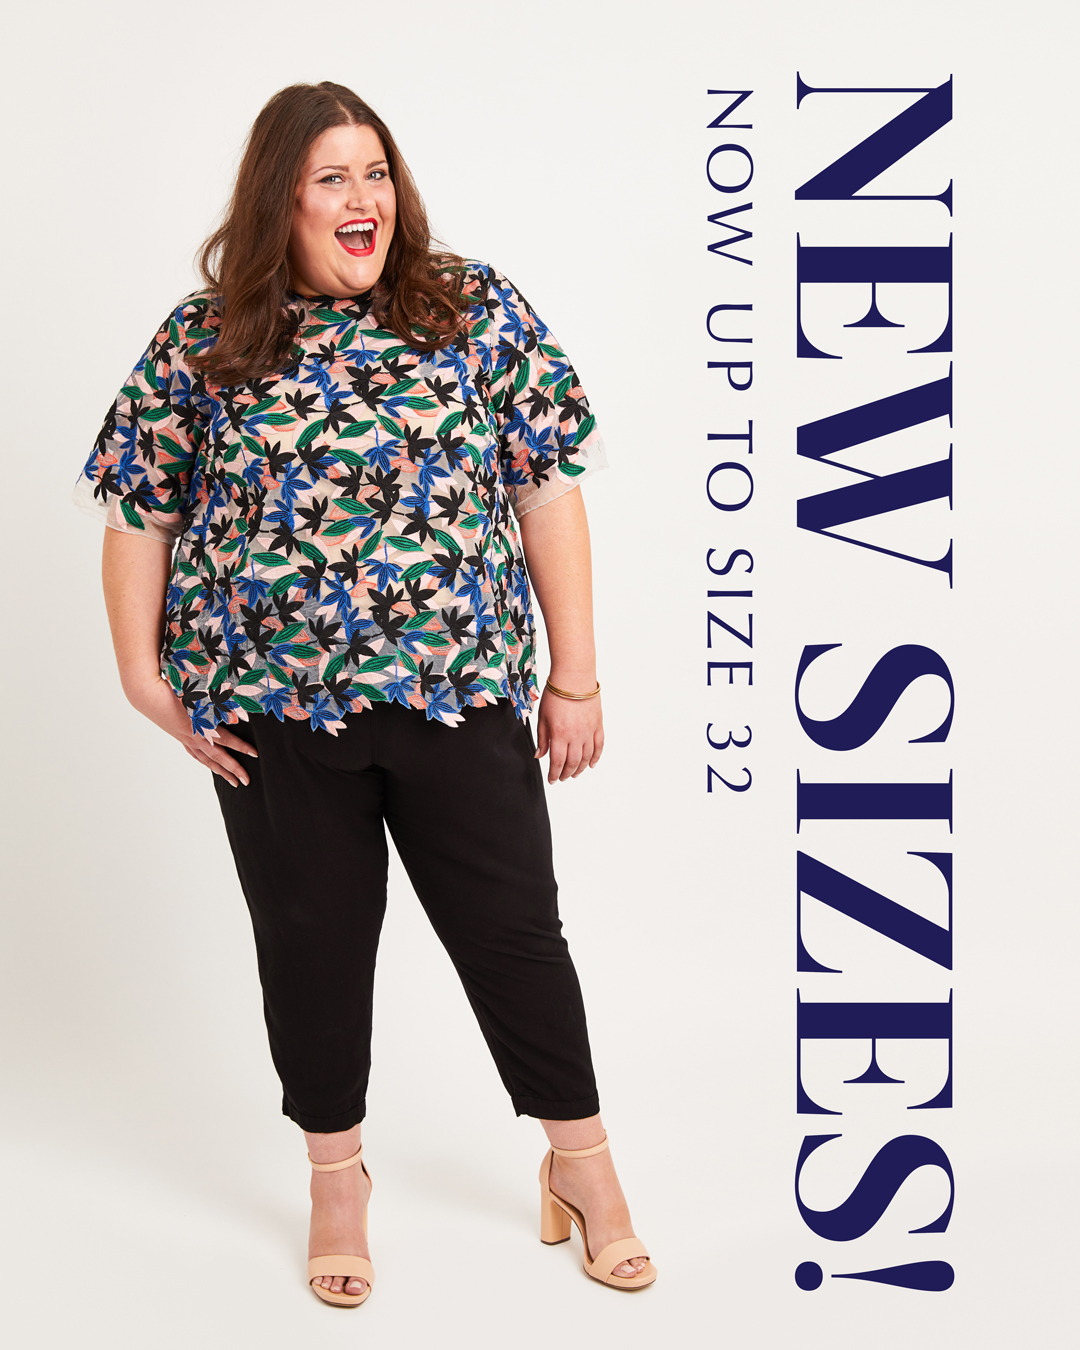 New Size Range for Cashmerette Sewing Patterns